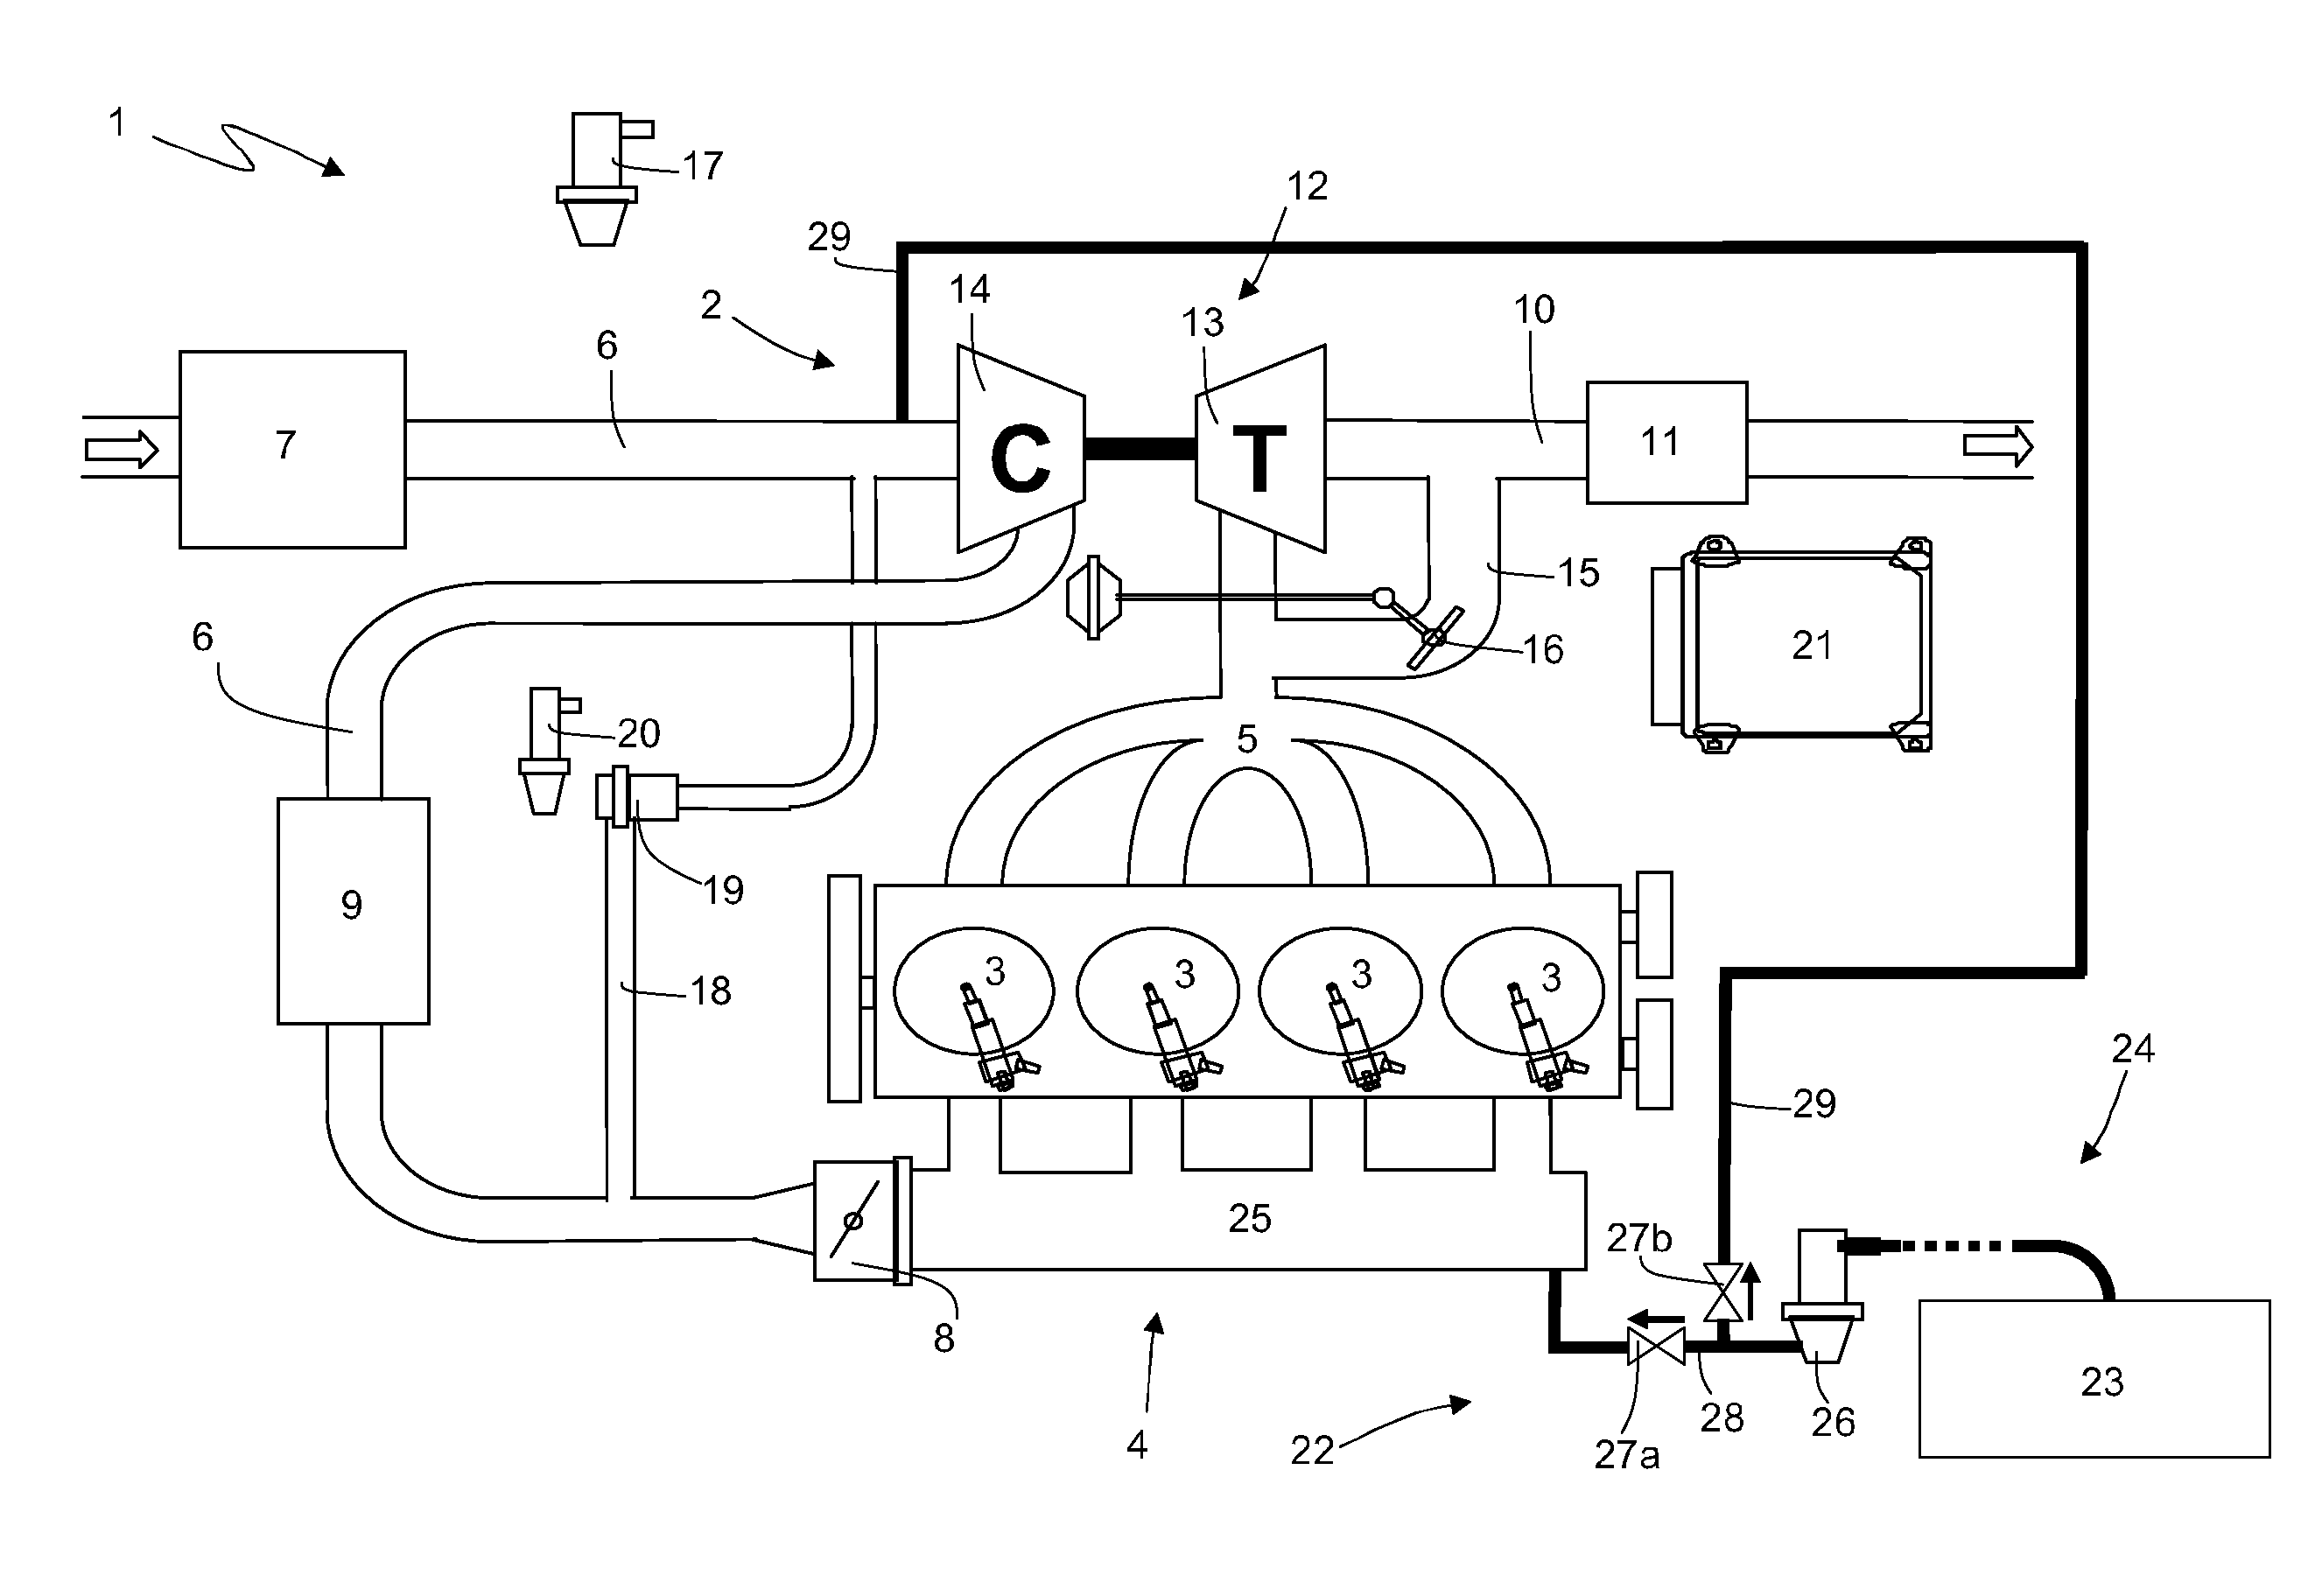 Intake Manifold With Integrated Canister Circuit For A Supercharged Internal Combustion Engine